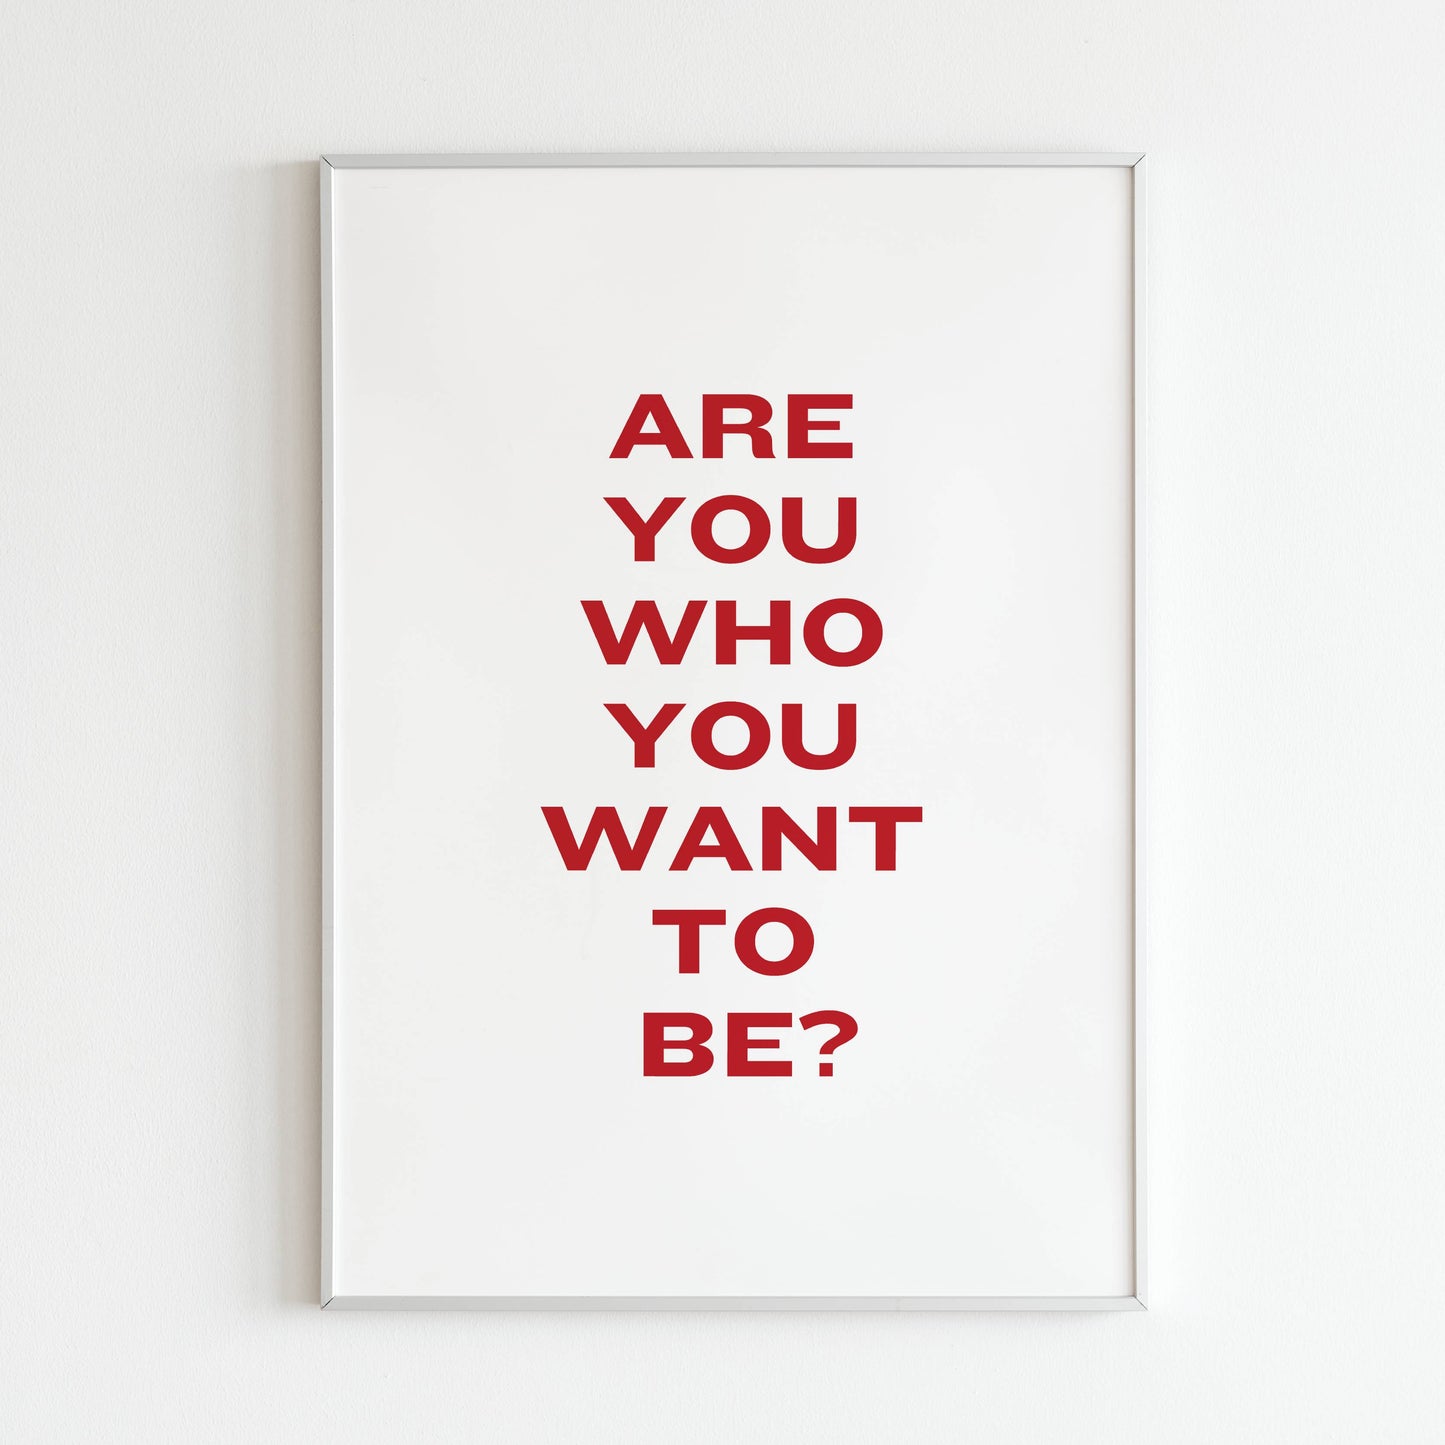 Downloadable typography wall art prompting self-evaluation